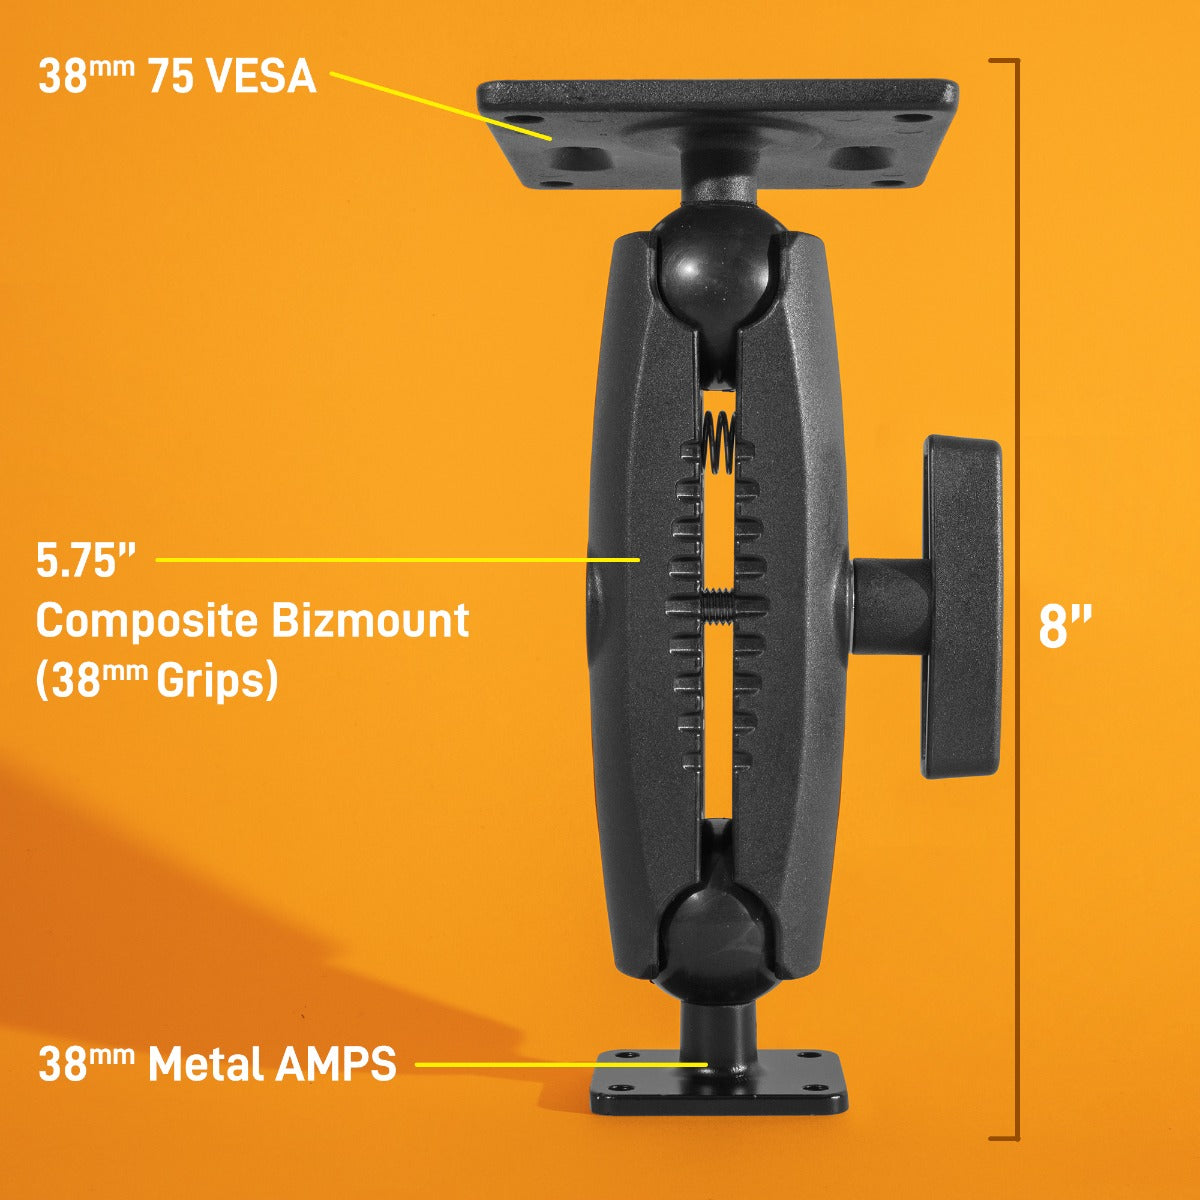 iBOLT™ 38mm / 1.5 inch Metal AMPS to VESA 75 x 75 Mount for Monitors, displays, or tv’s